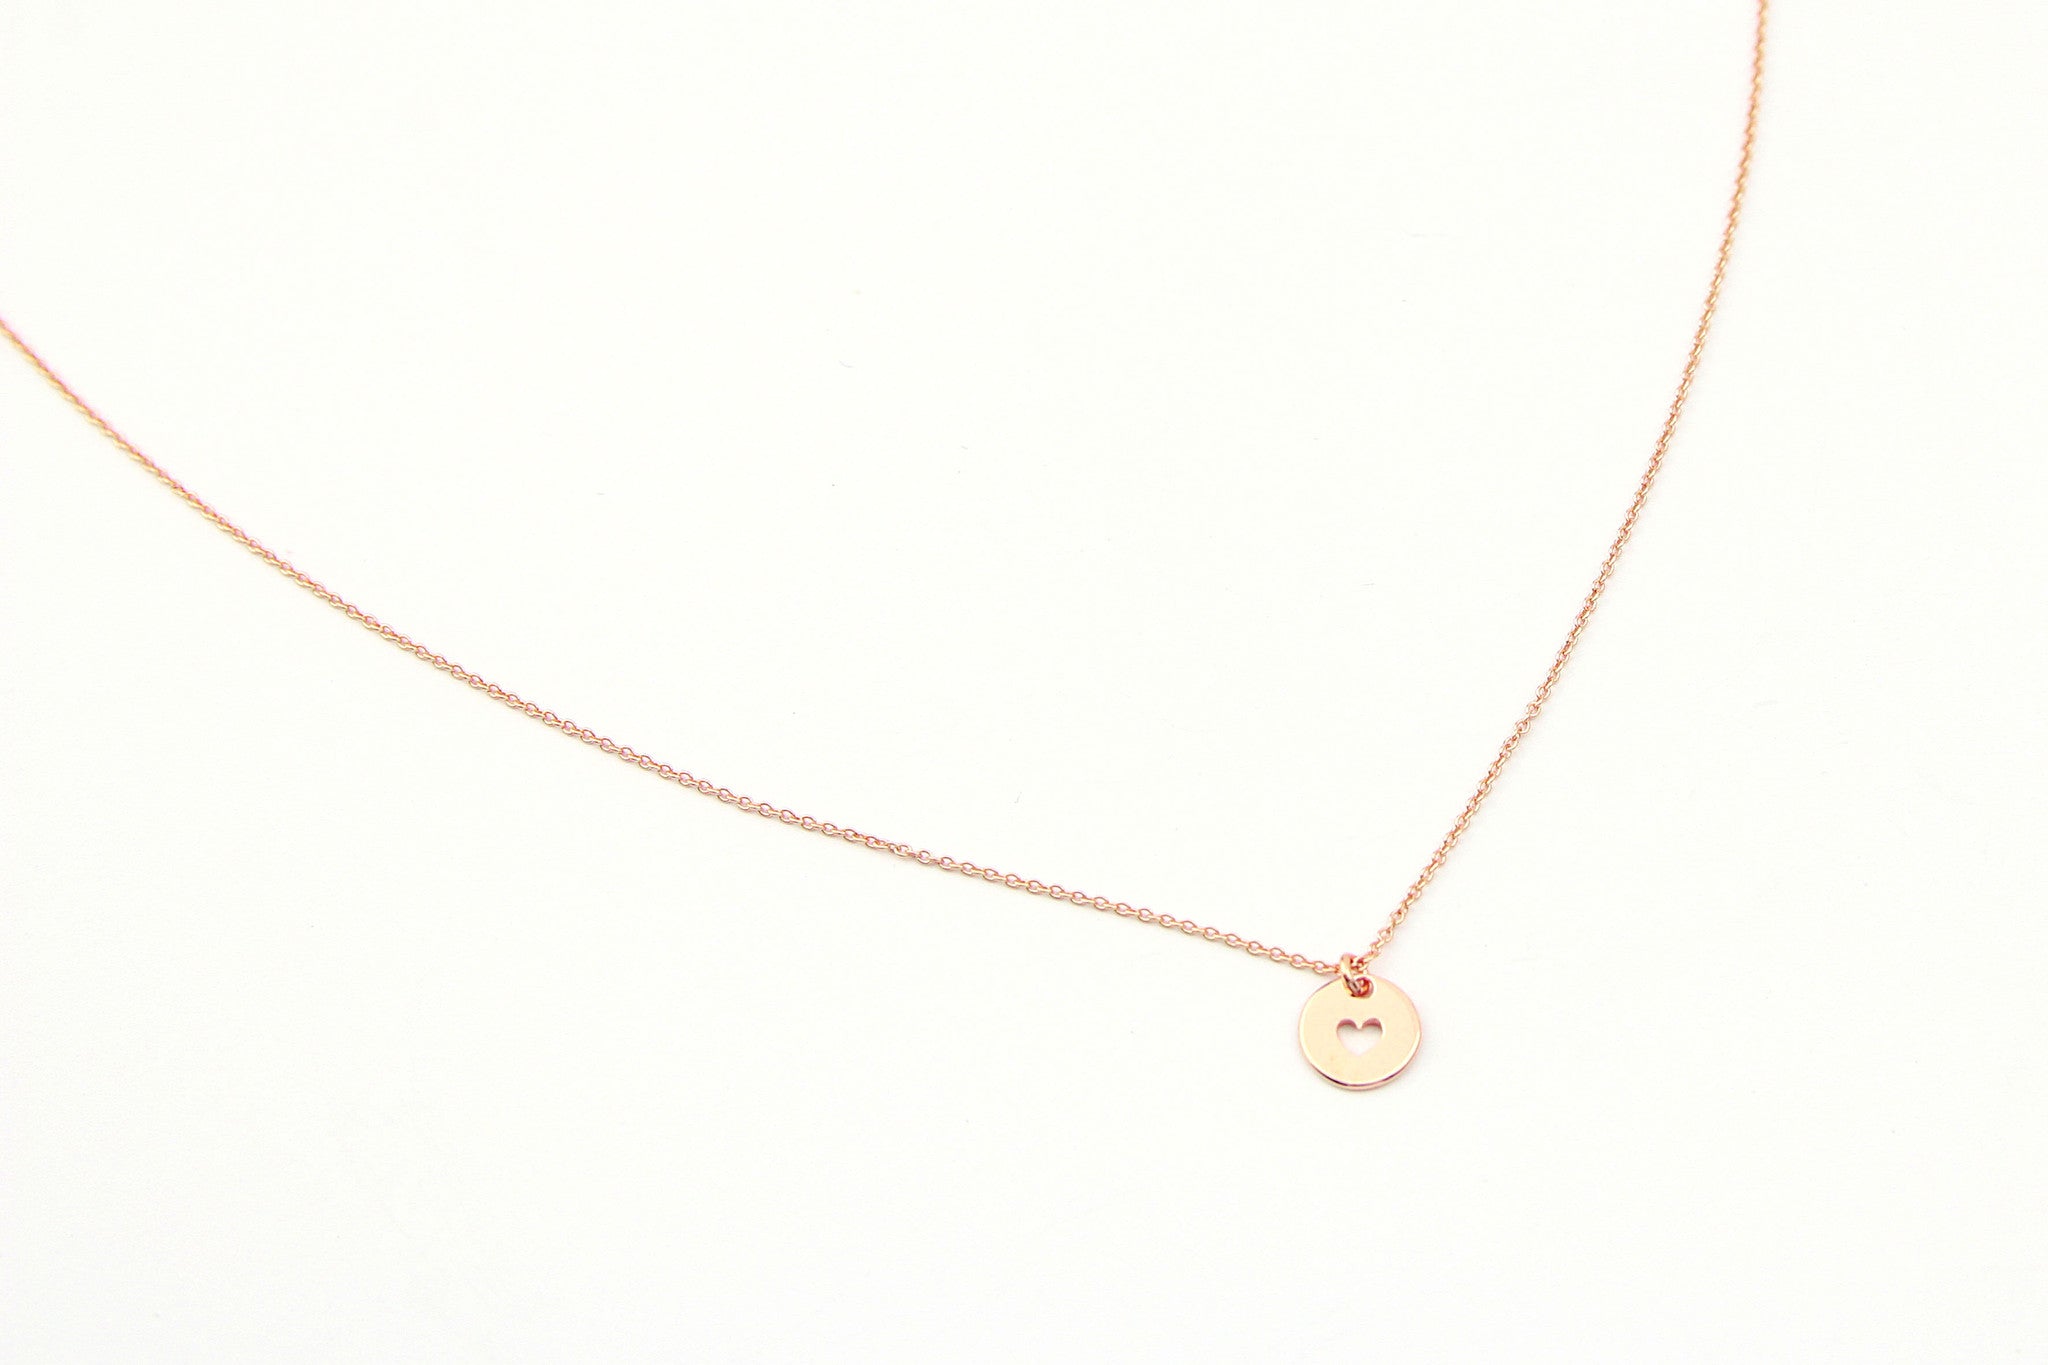 jewelberry necklace kette love token anchor chain rose gold plated sterling silver fine jewelry handmade with love fairtrade